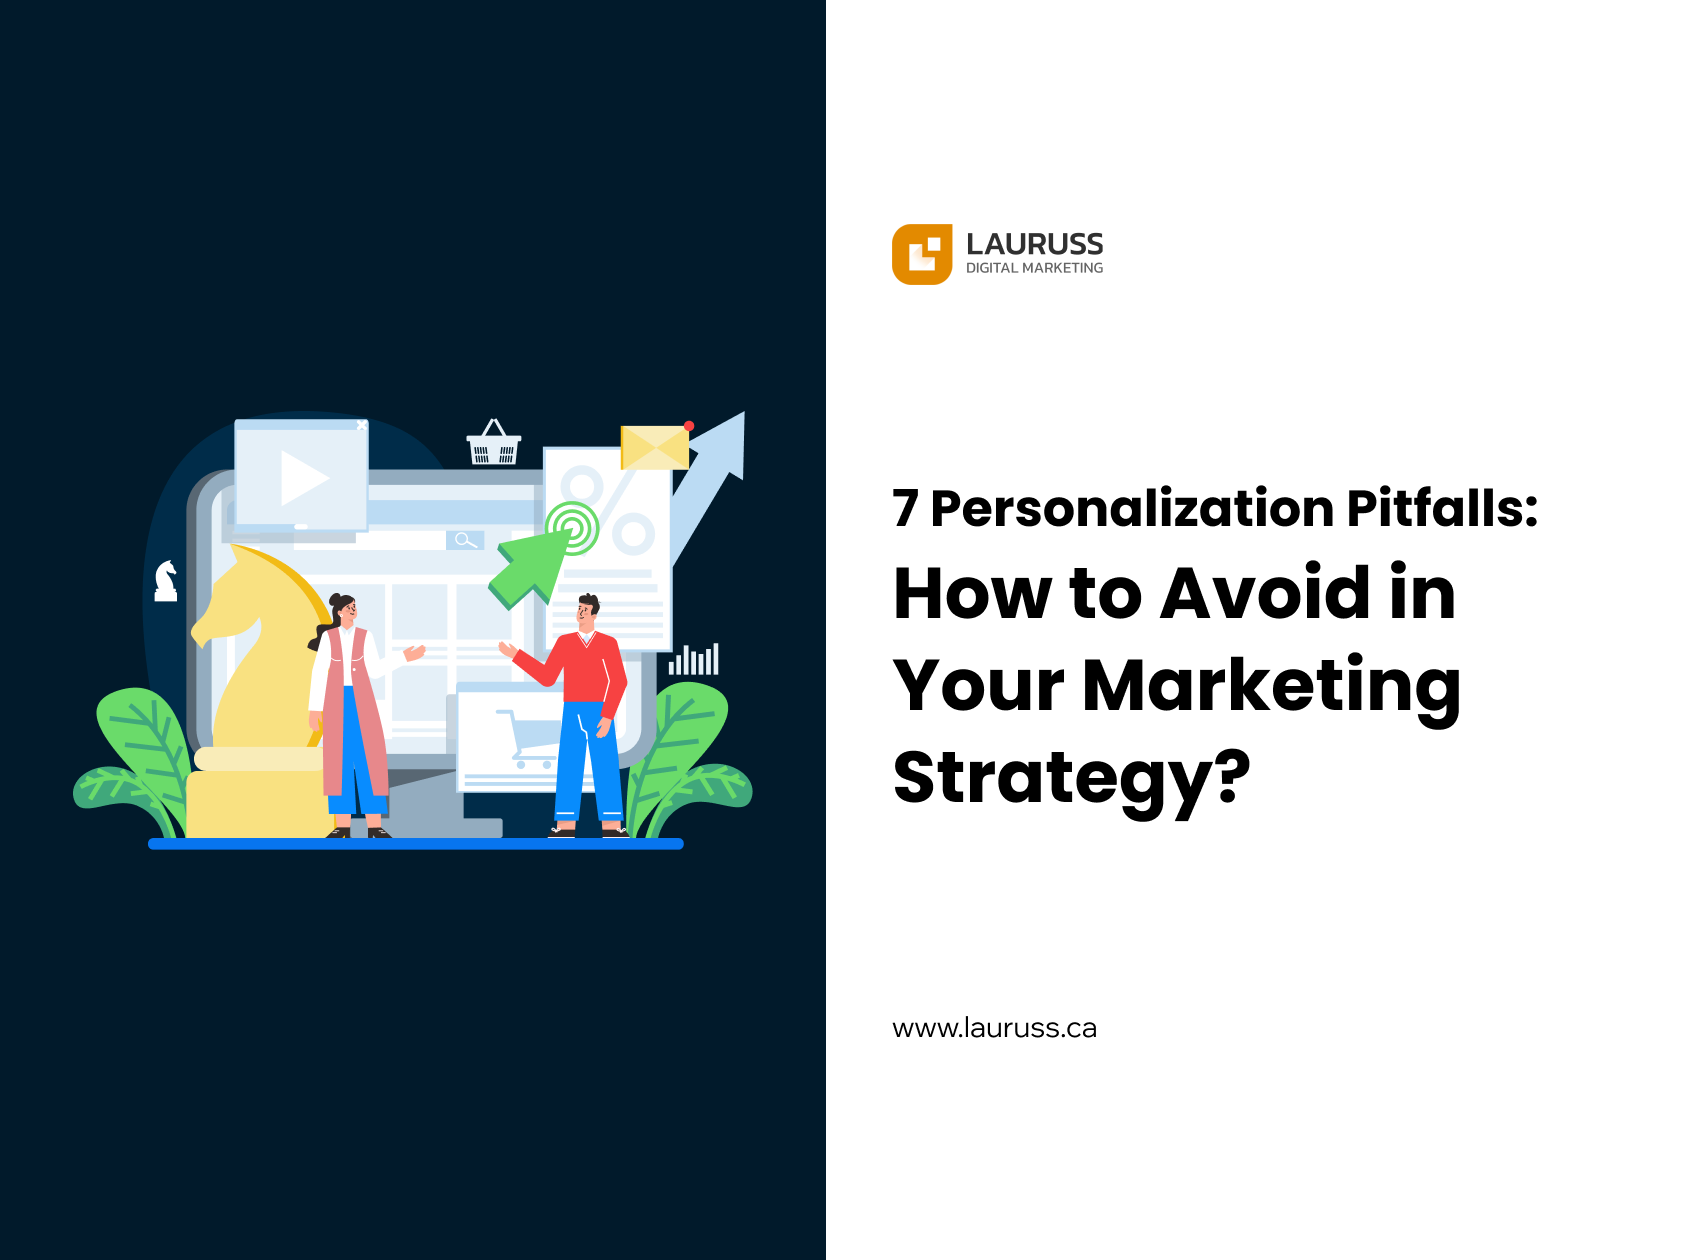 7 Personalization Pitfalls: How to Avoid in the Marketing Strategy